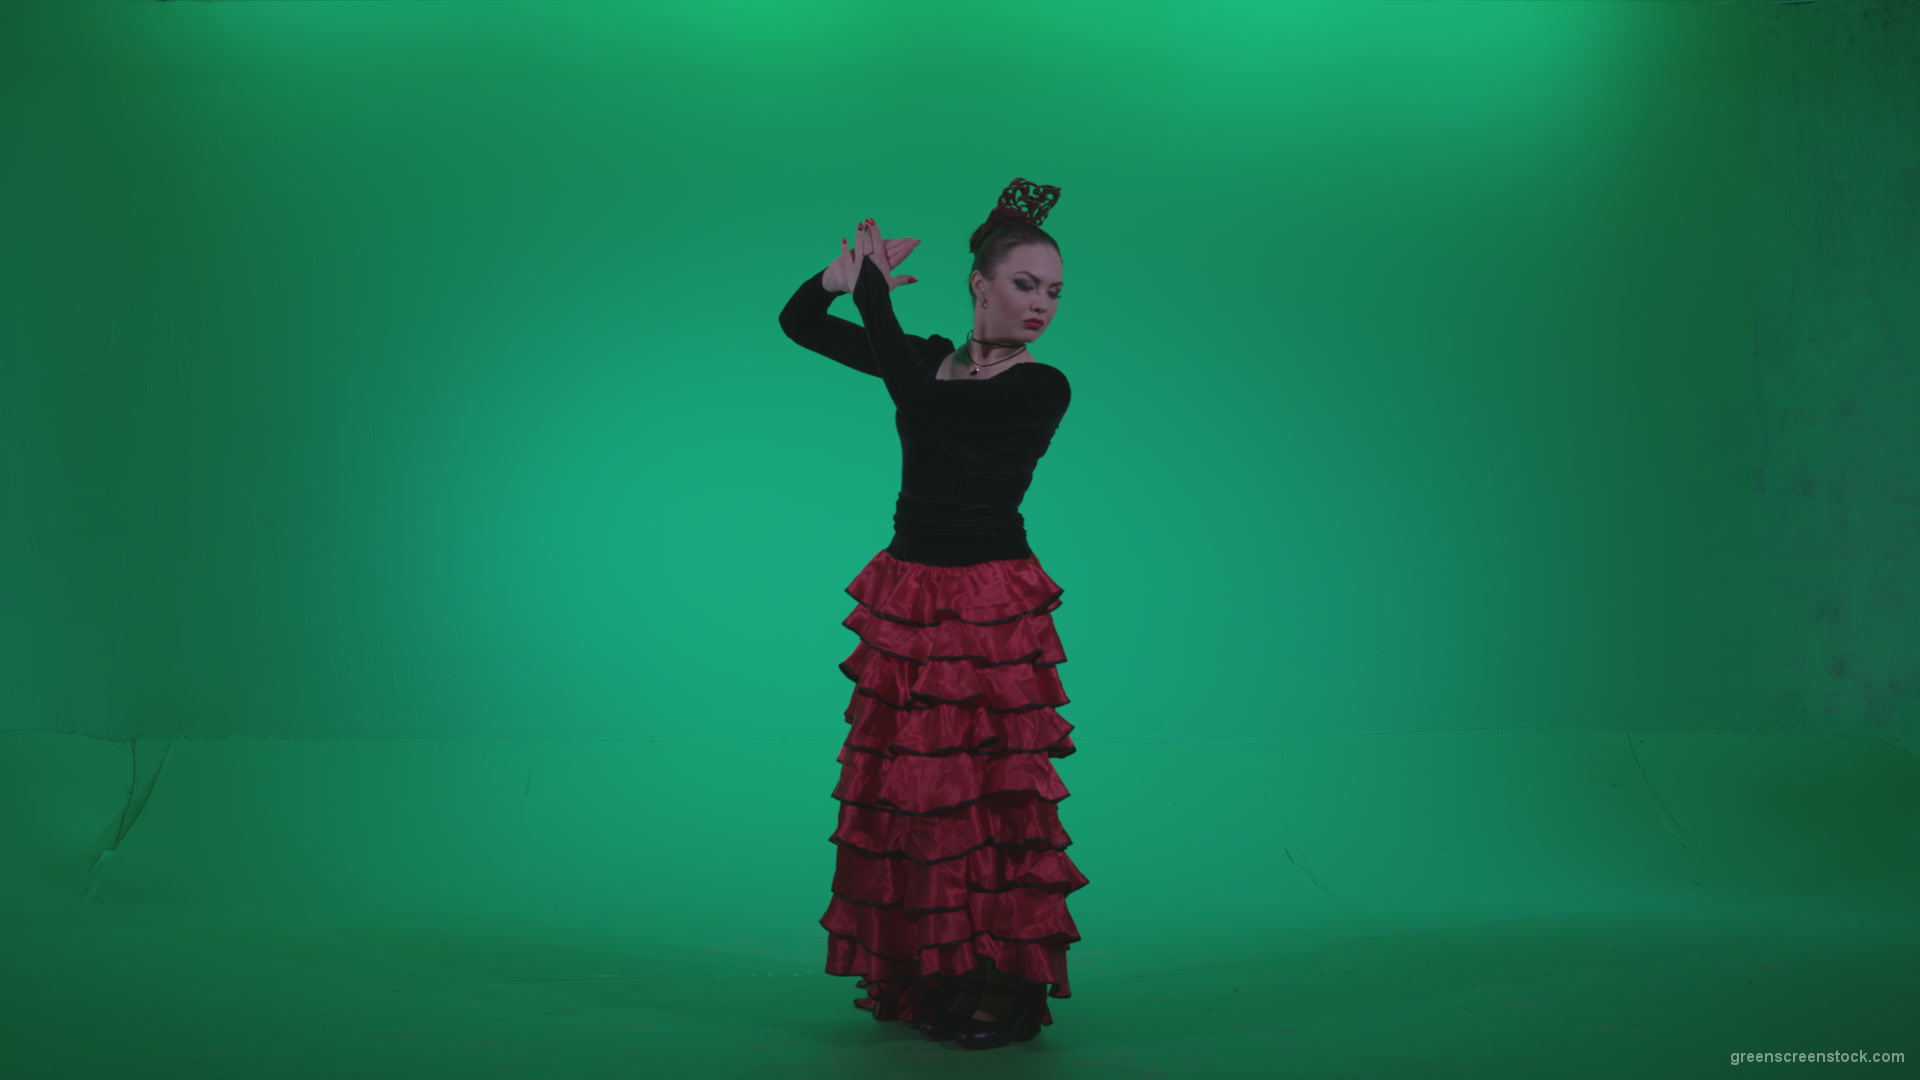 Flamenco-Red-and-Black-Dress-rb12-Green-Screen-Video-Footage_009 Green Screen Stock